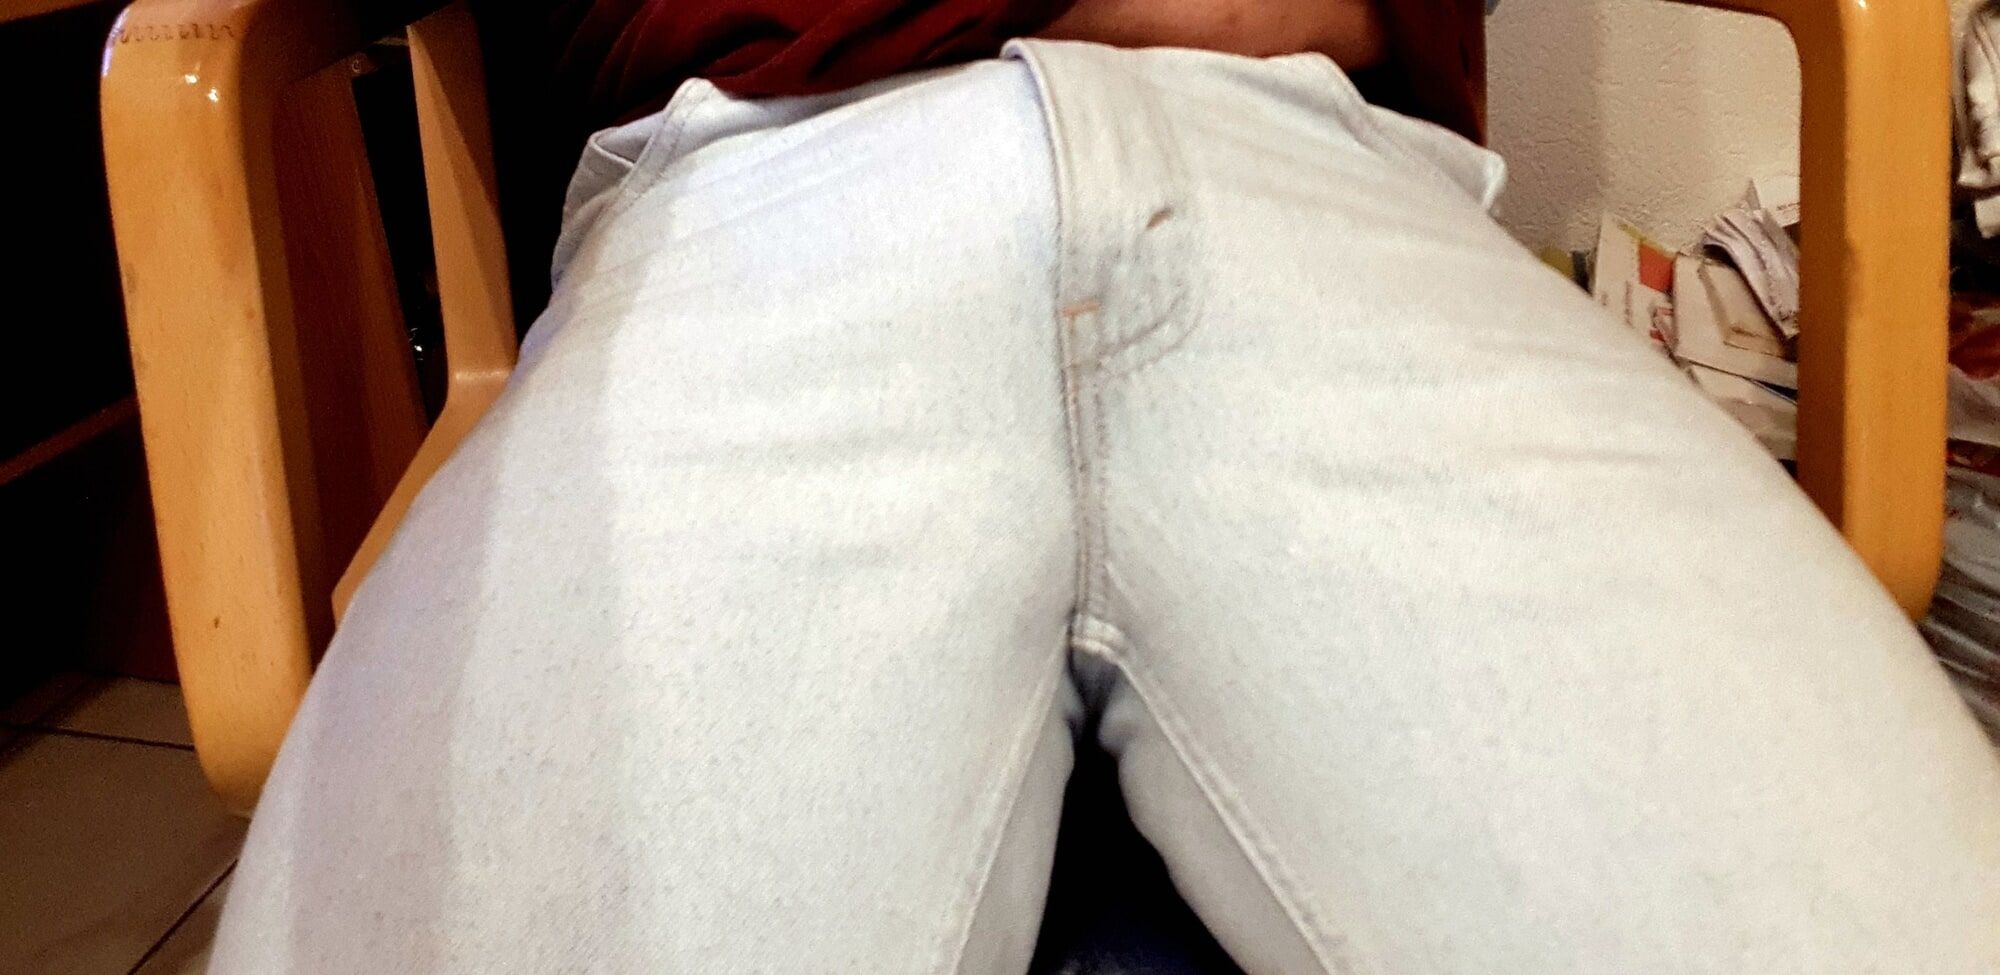 Erection in pants #13